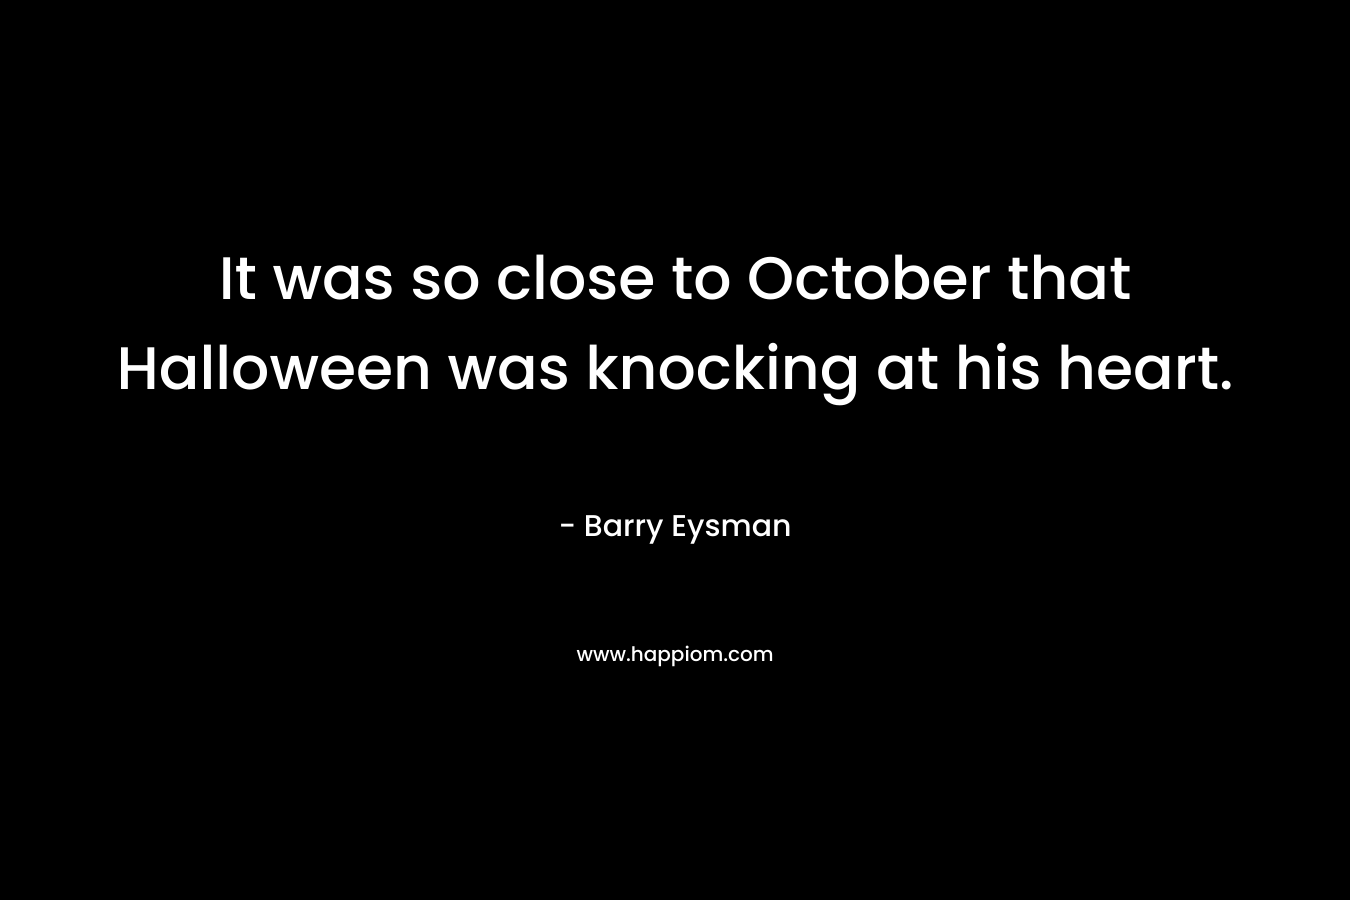 It was so close to October that Halloween was knocking at his heart. – Barry Eysman